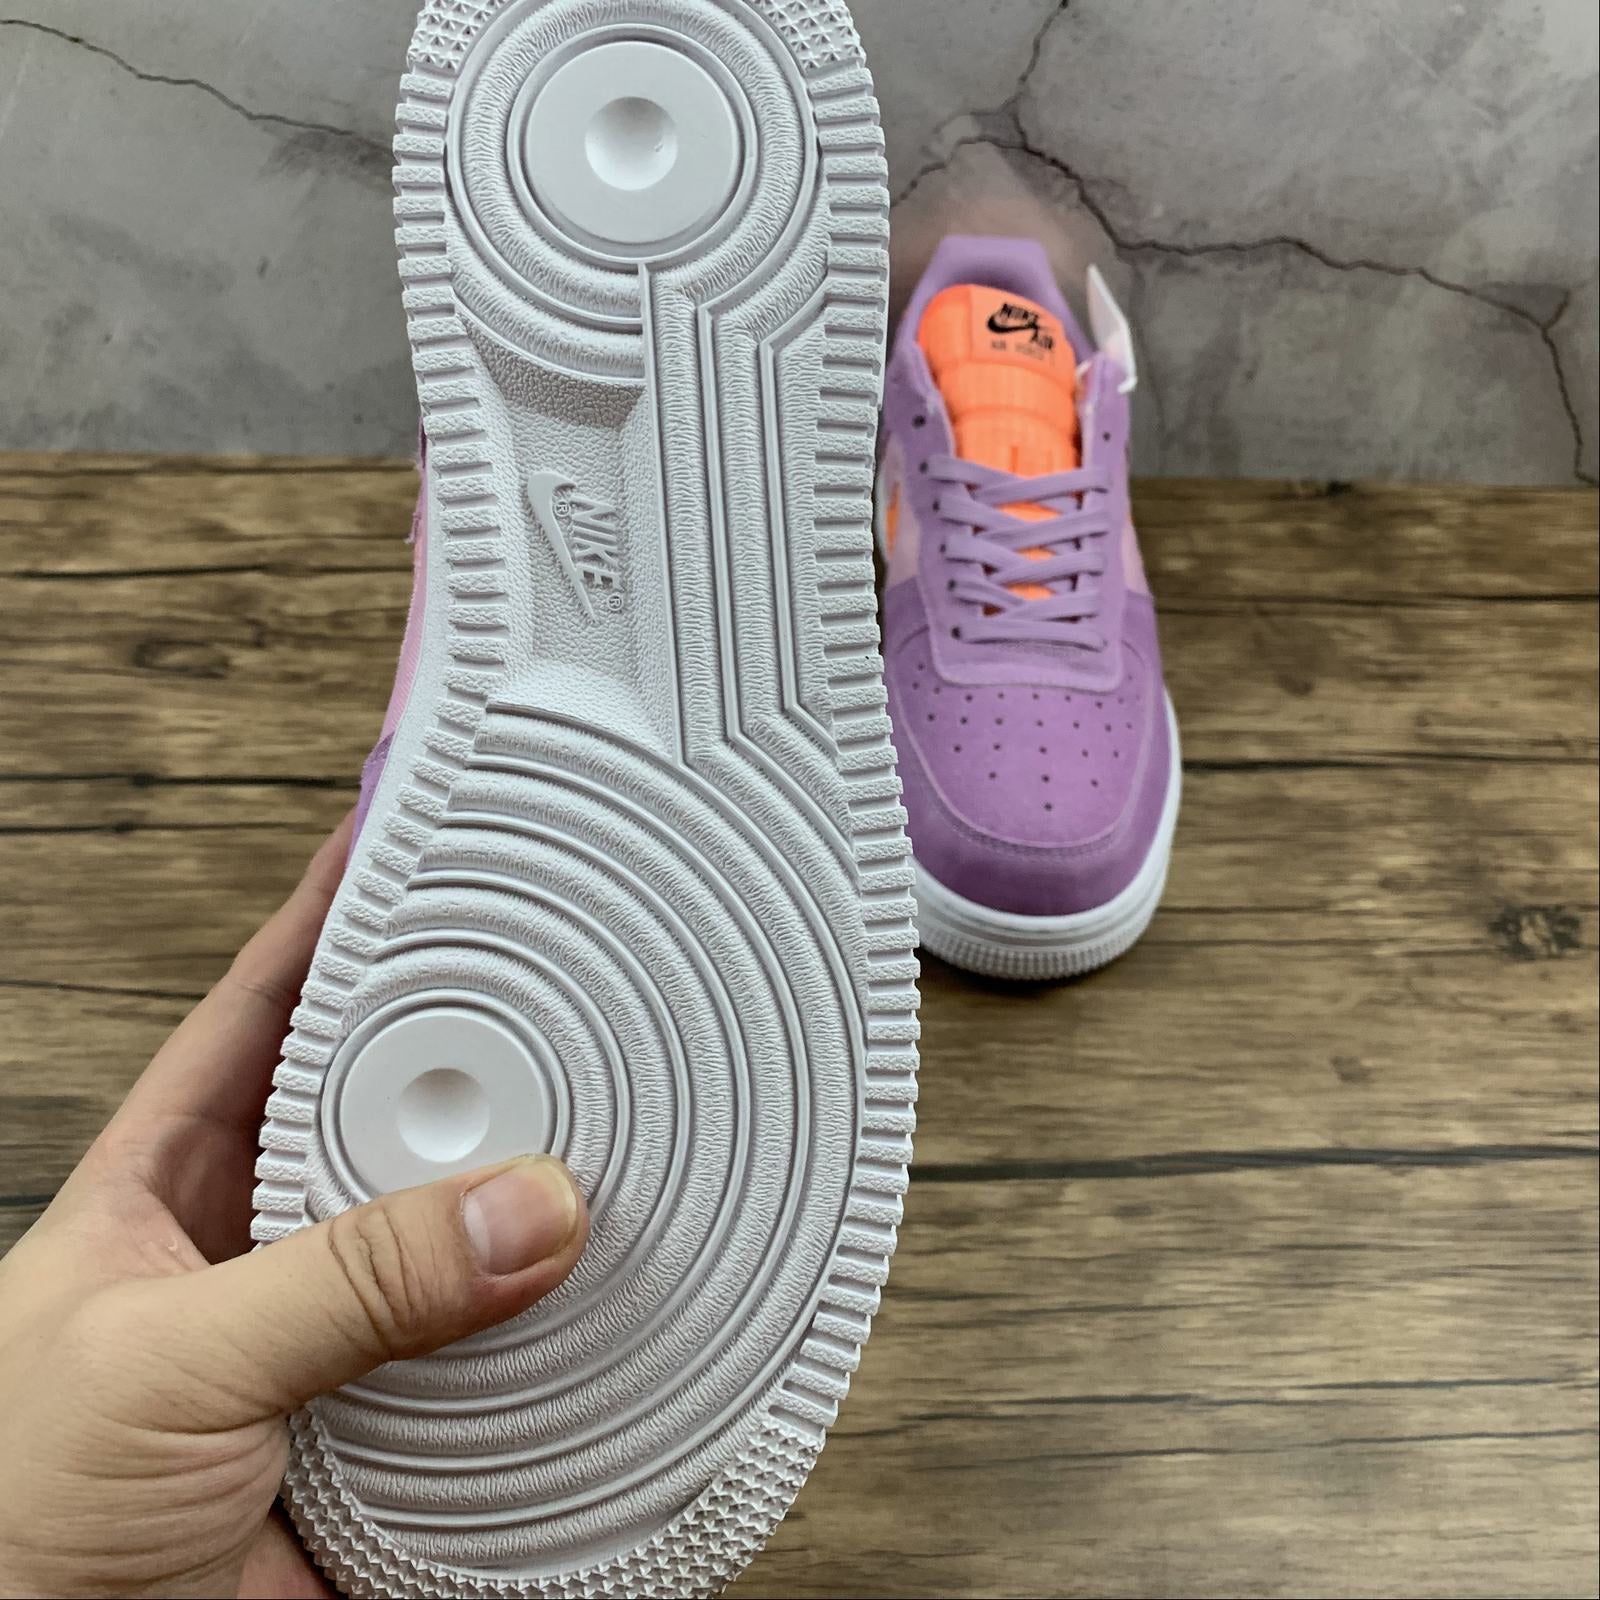 Tuhz Nike Air Force 1 Violet Star Low Sneakers Casual Skaet Shoe